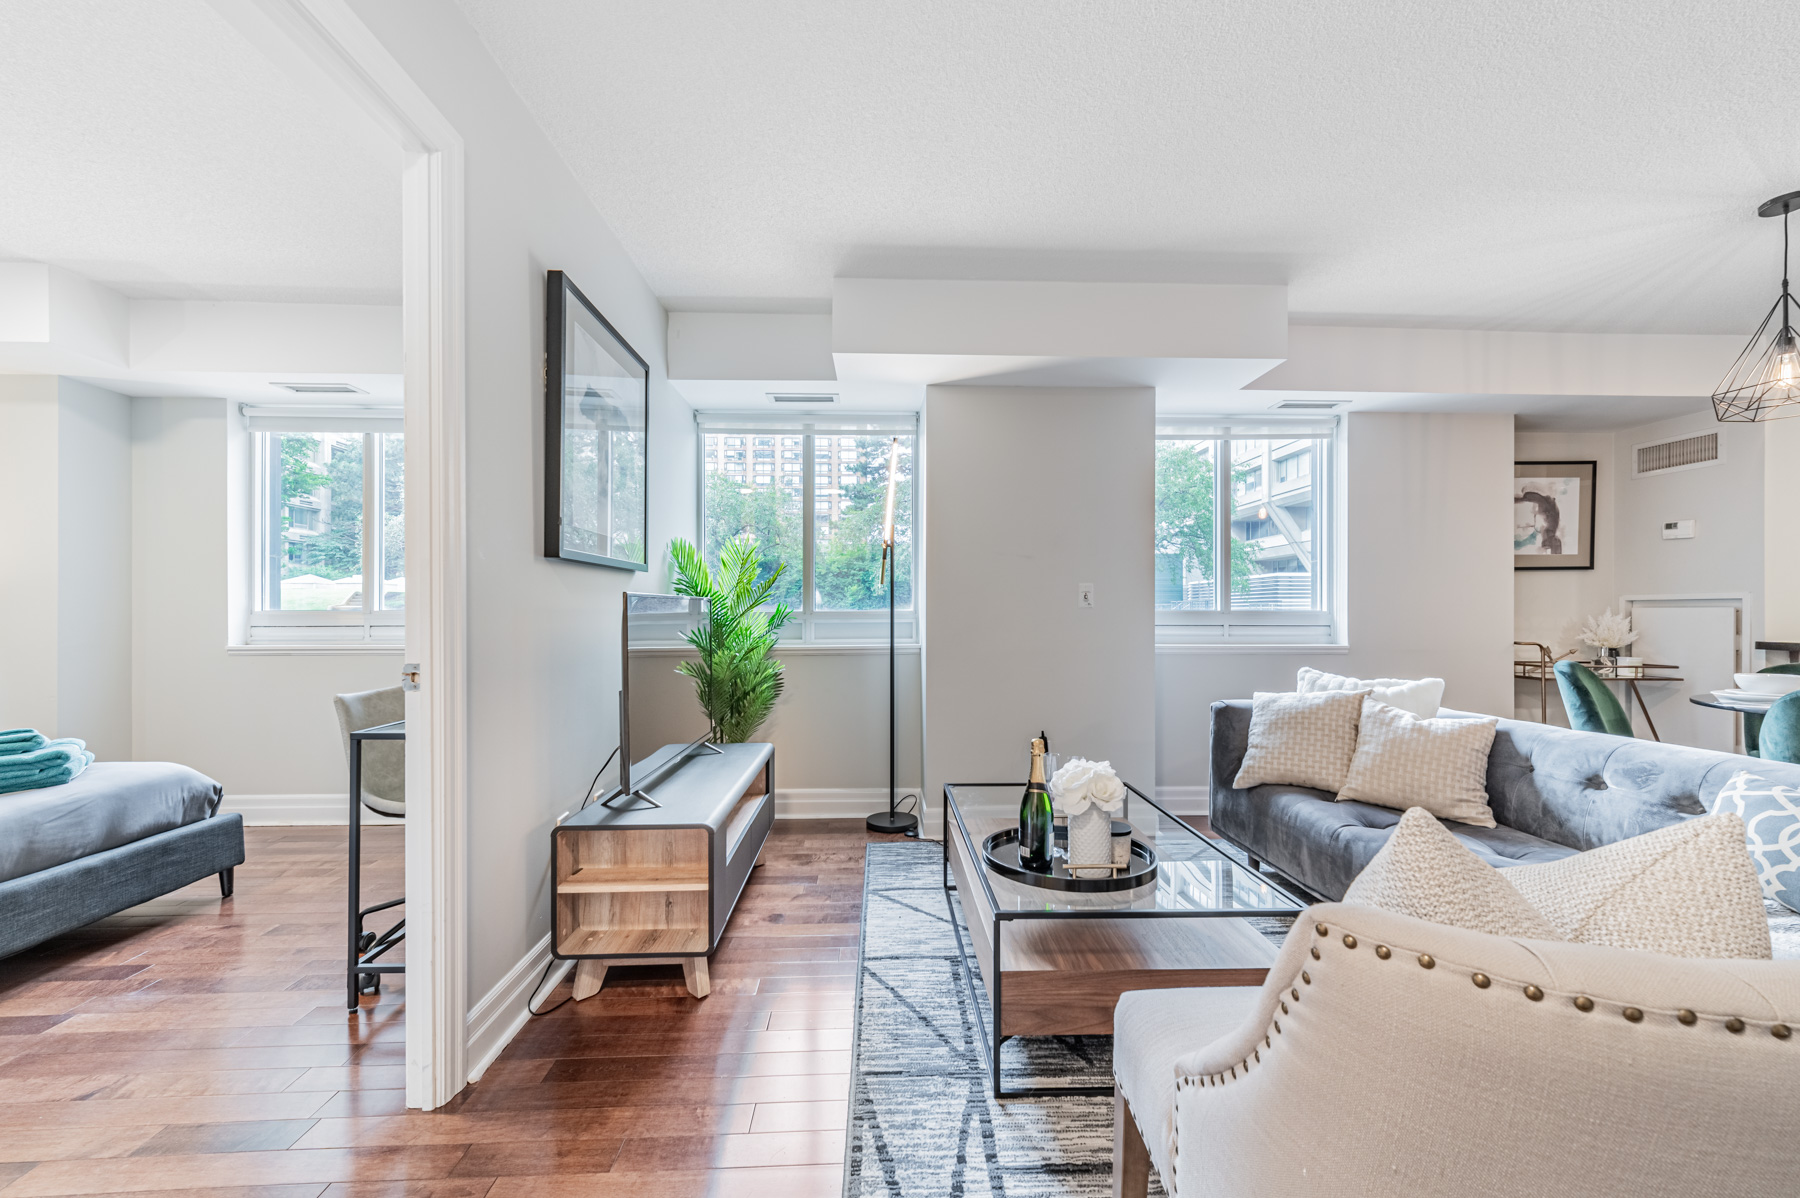 Bedroom, living room and dining room lit by windows – 35 Balmuto St Suite 401.